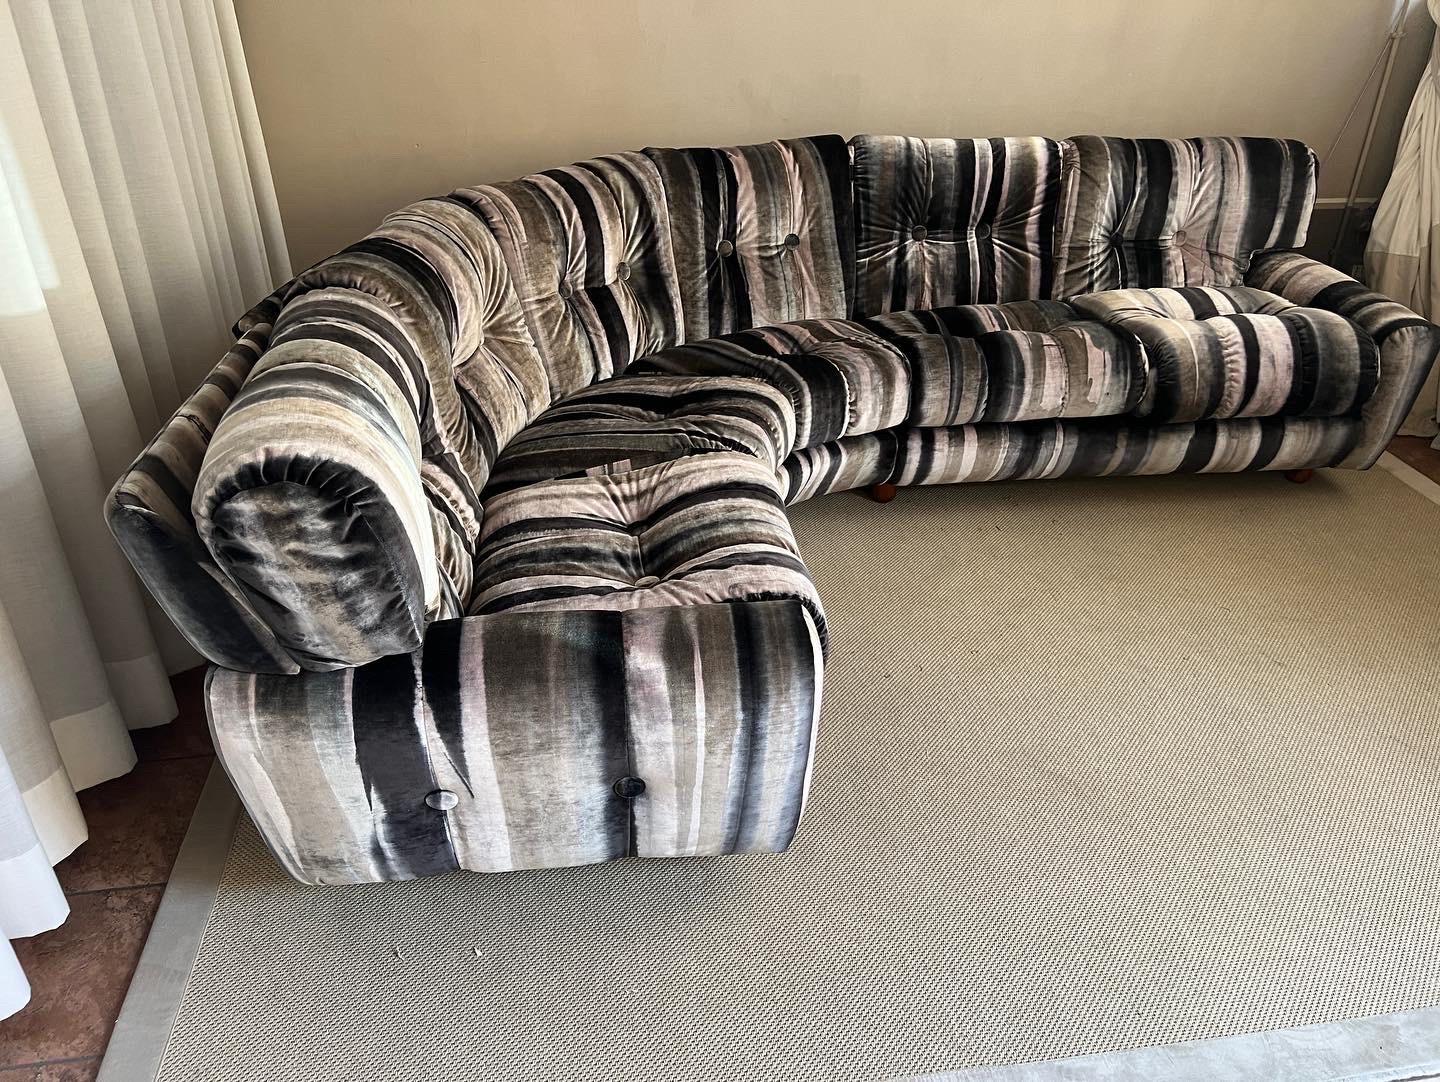 Italian Mid-Century Circolar Selectional sofa, Newly Upholstered with Kirkby Velvet shaded gray tones.
The external circumference is cm 420; maximum wall length cm 380, depth at the point where it spins cm 190
Three pieces sofa.